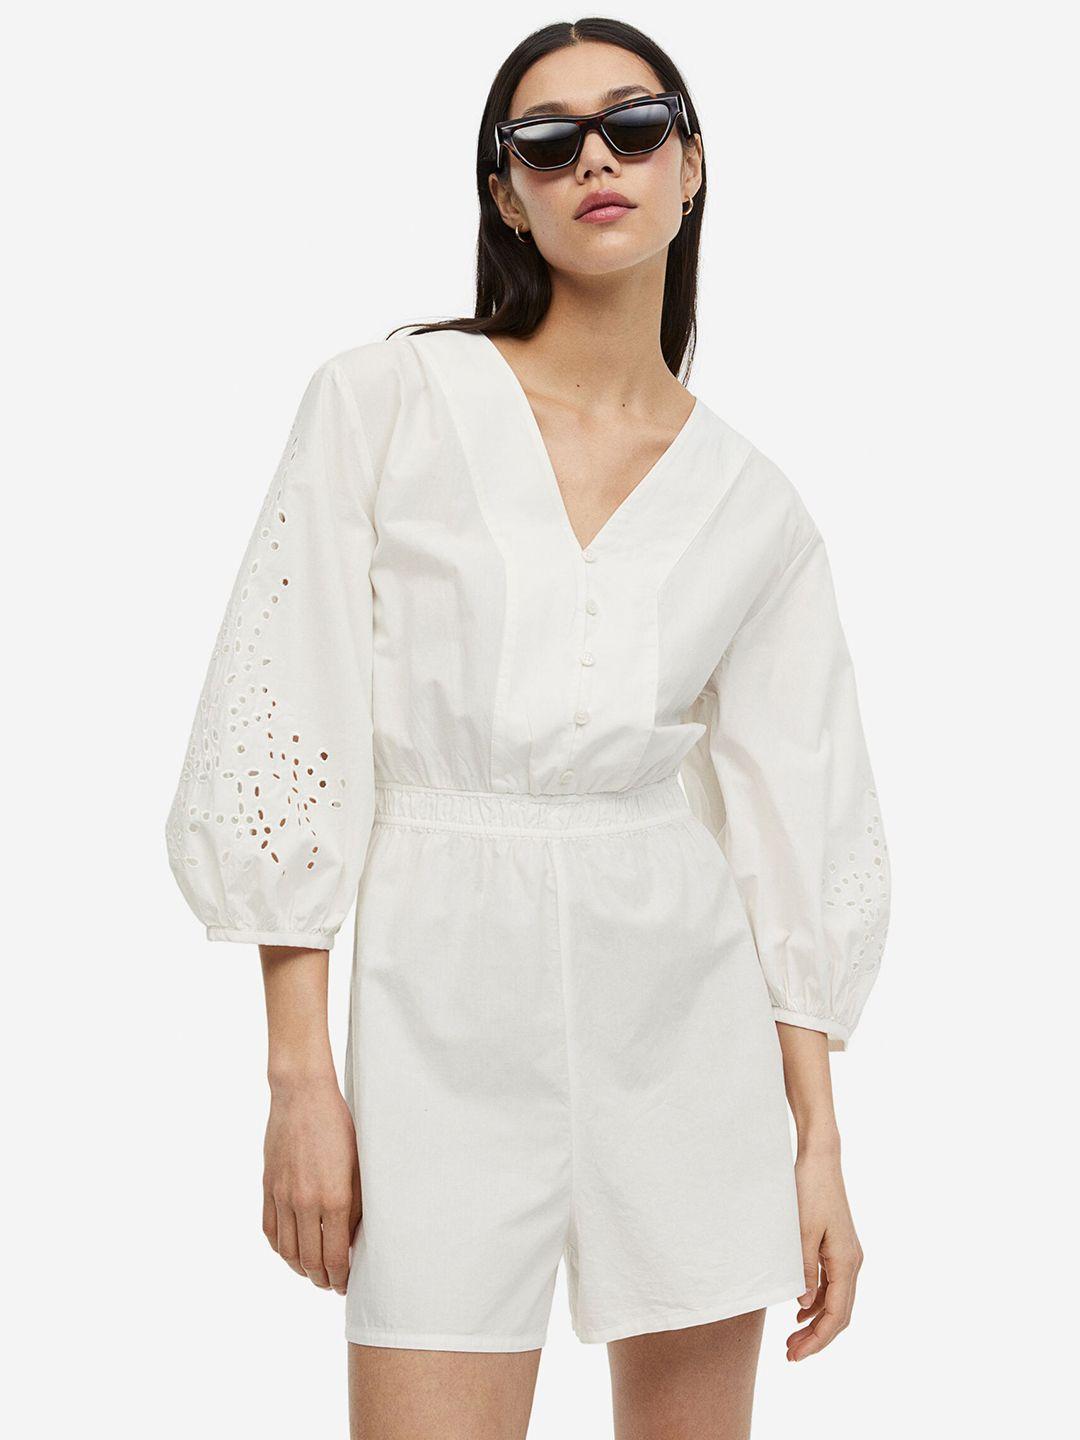 h&m-pure-cotton-broderie-anglaise-playsuit